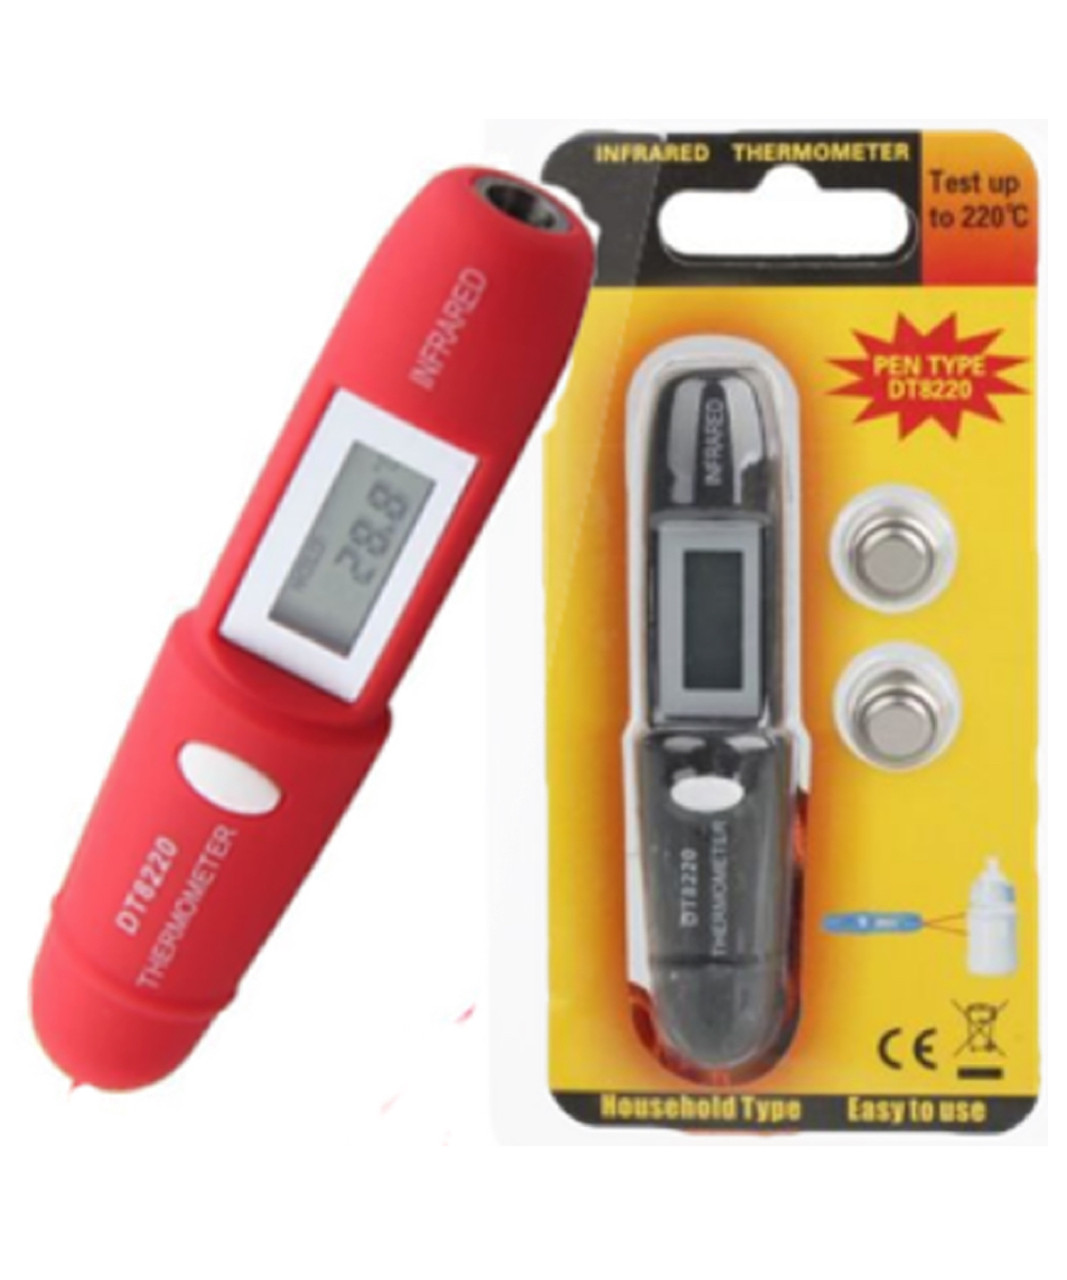 https://cdn11.bigcommerce.com/s-apc69m1e/images/stencil/1280x1280/products/386/3446/Infrared_IR_Laser_Digital_Thermometer__16349.1494033340.jpg?c=2